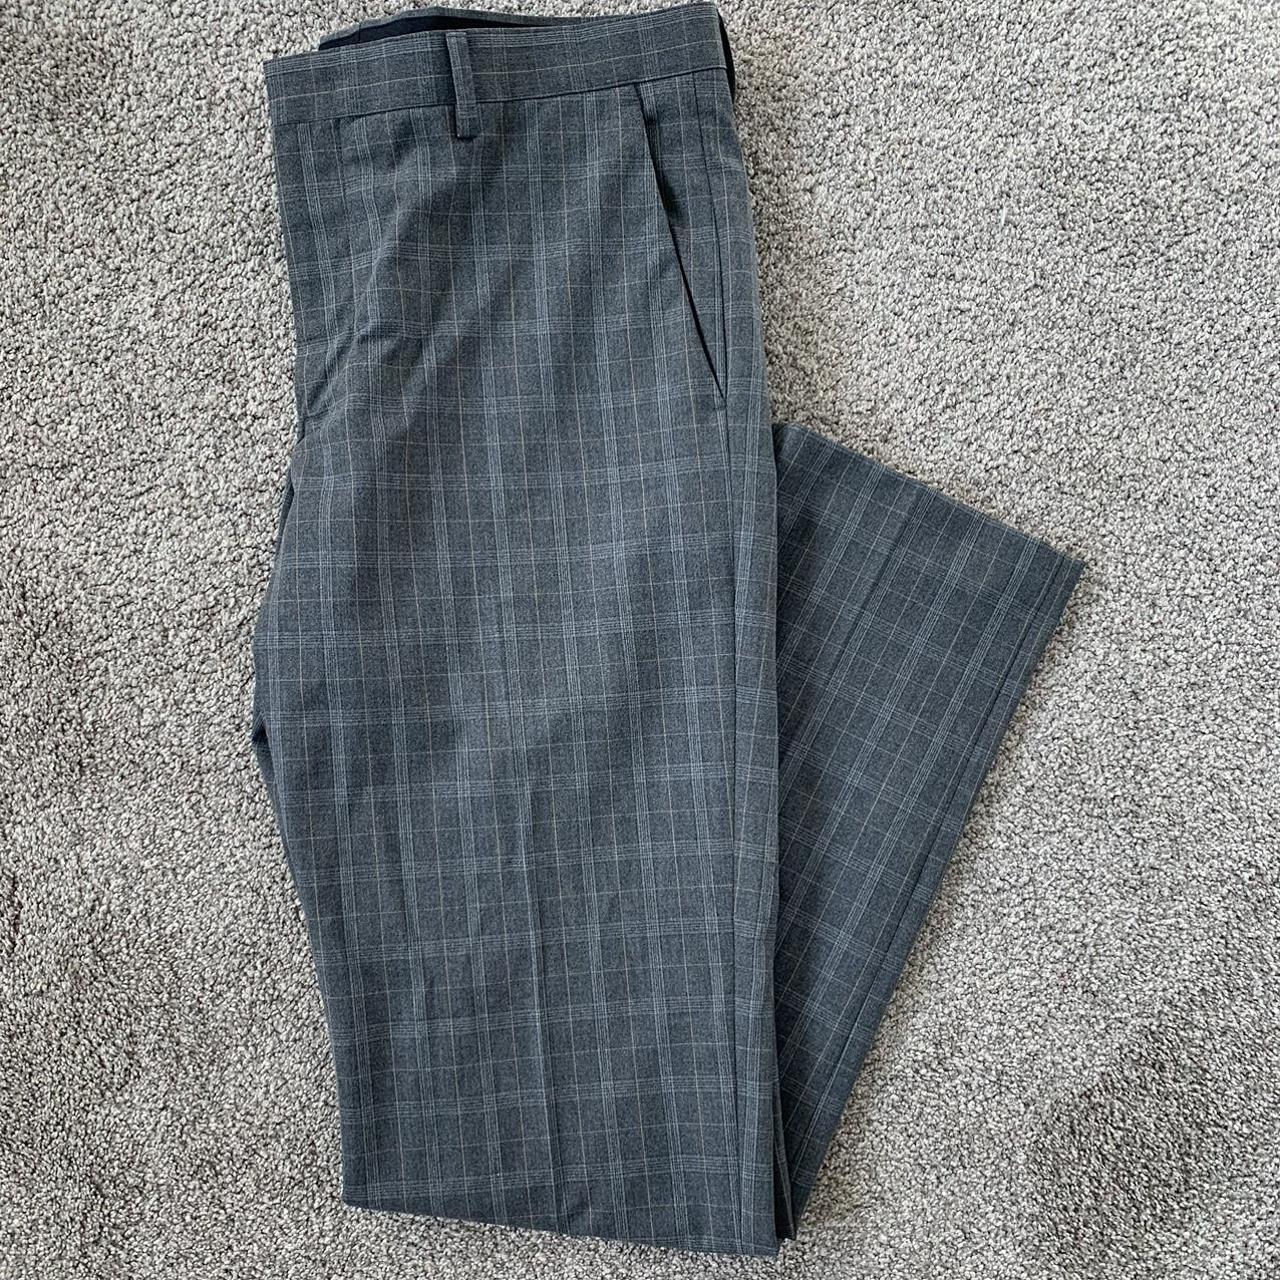 Classic murano plaid dress pants tailored to fit a... - Depop